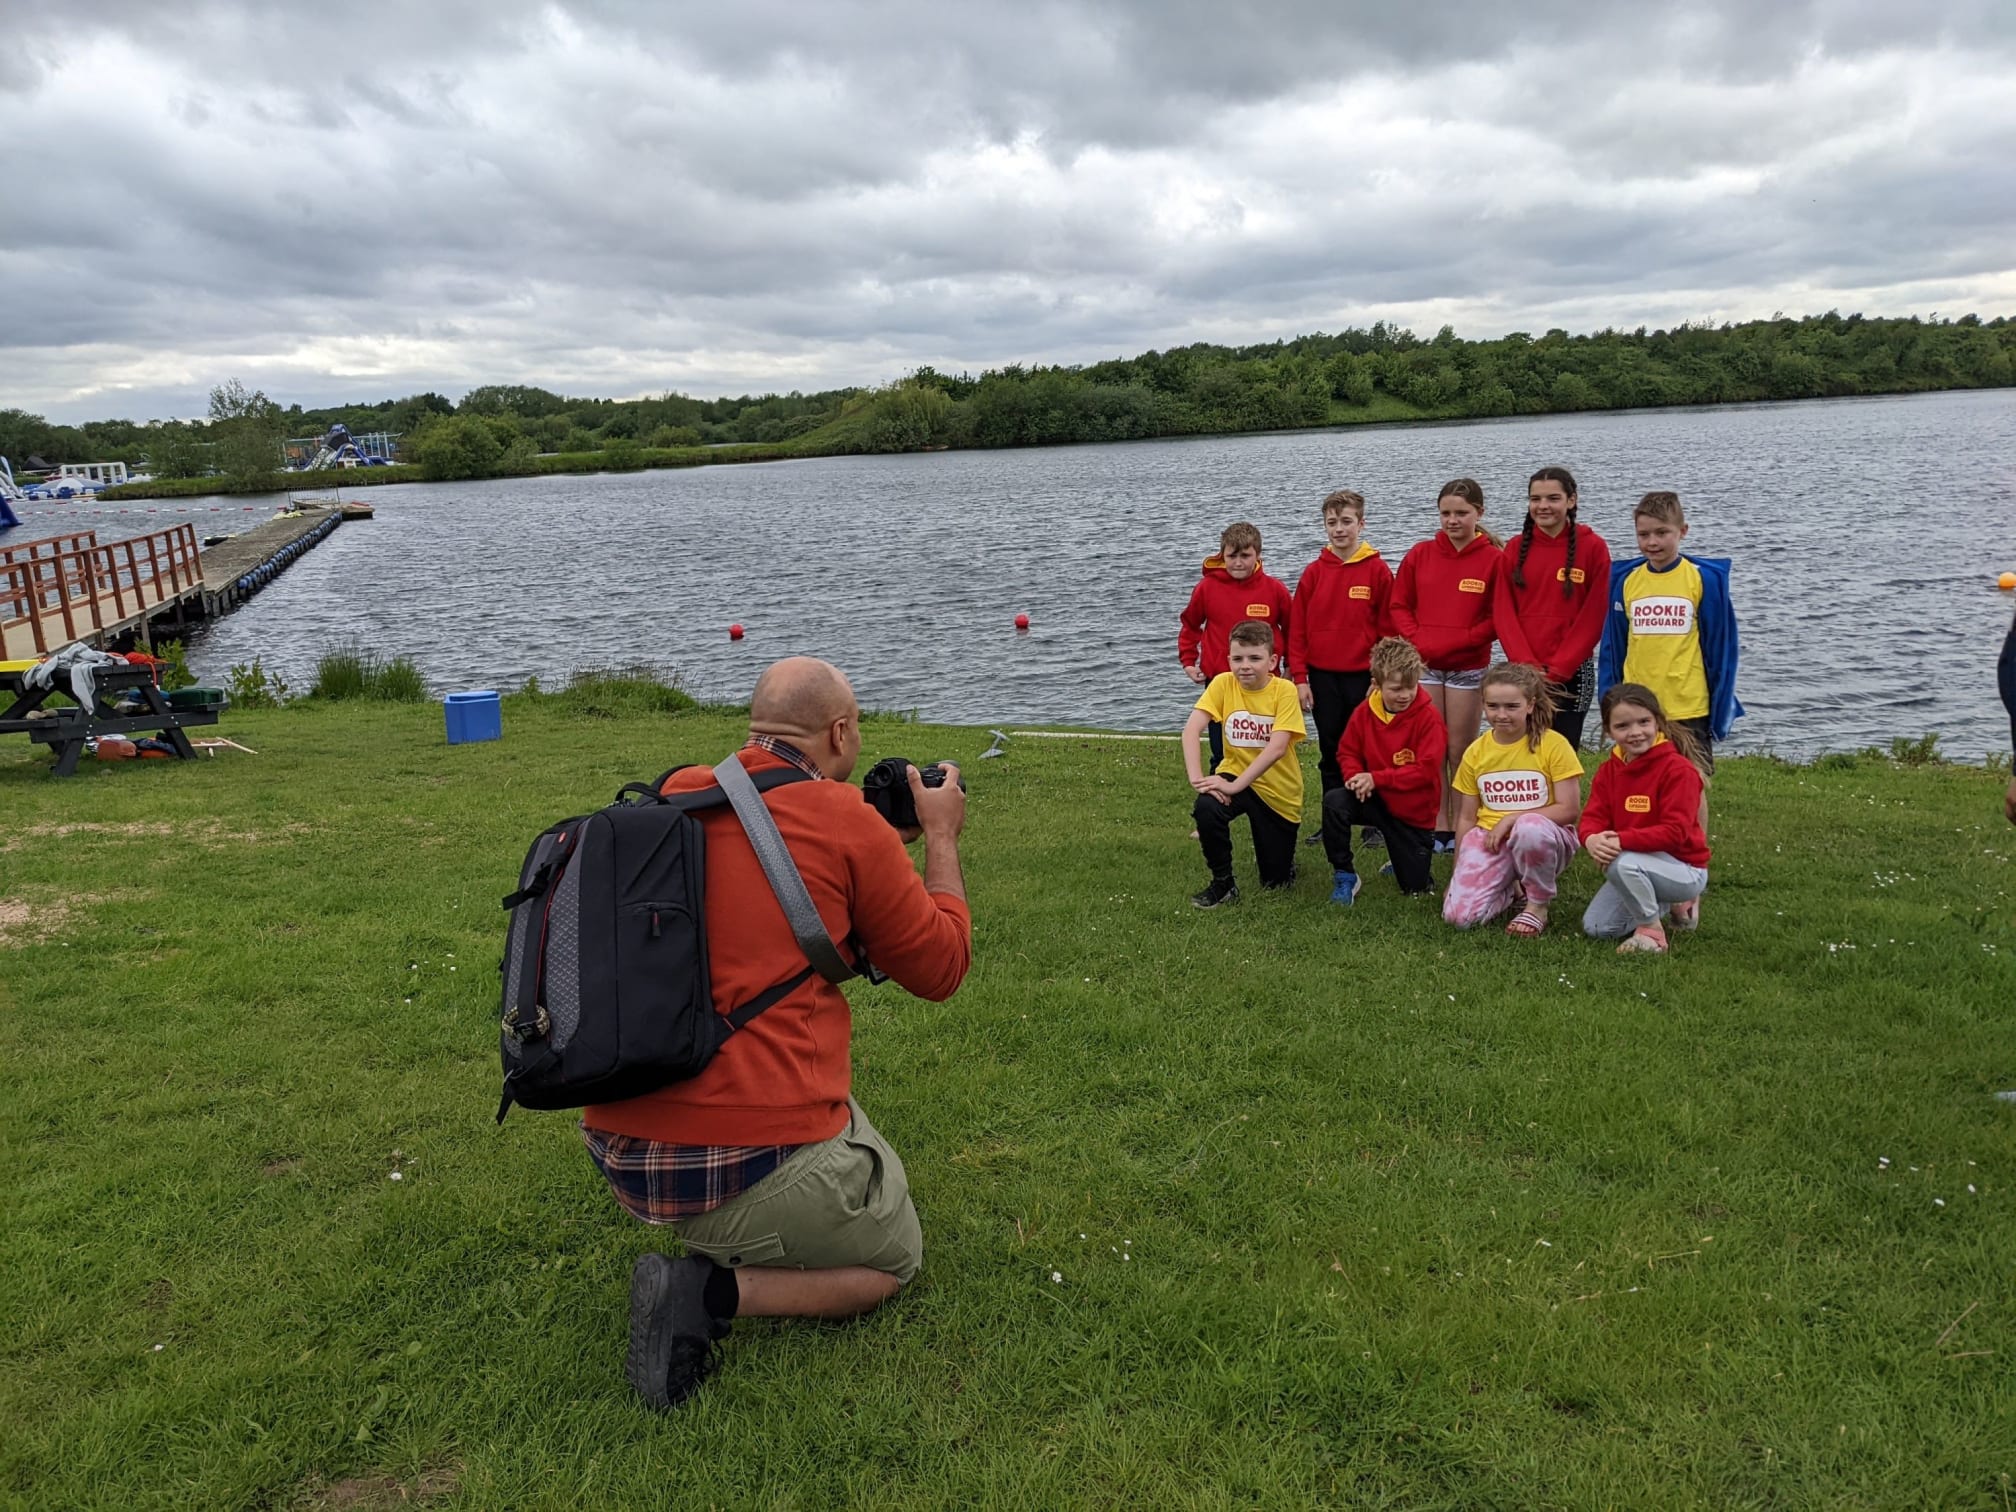 photographer taking a photo of children in Rookie Lifeguard uniforms next to a lake